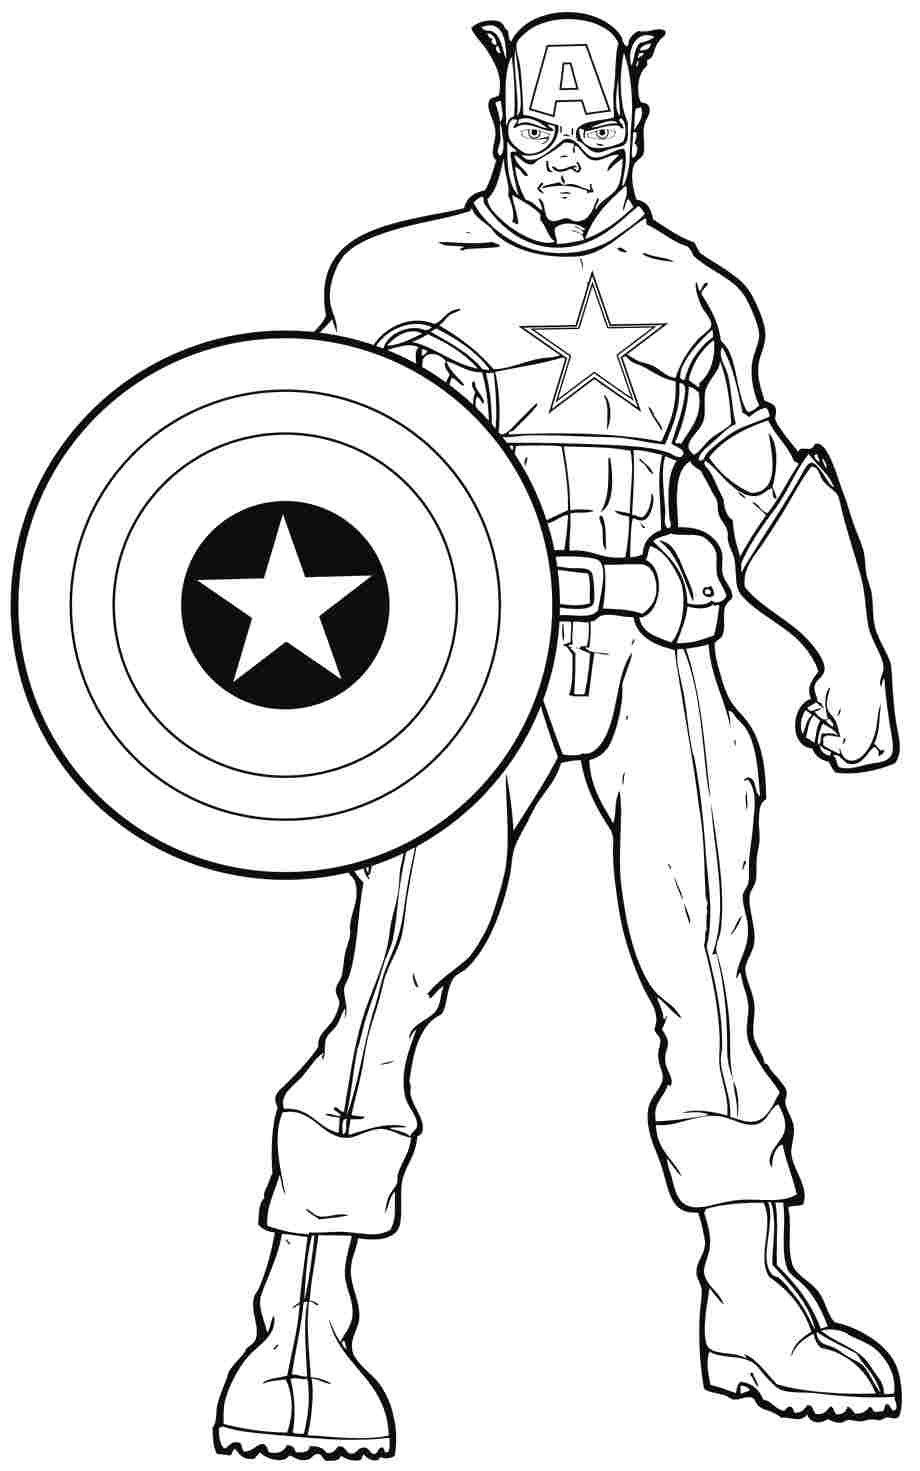 Coloring Sheets For Boys Marvel
 Marvel superhero coloring pages ColoringStar